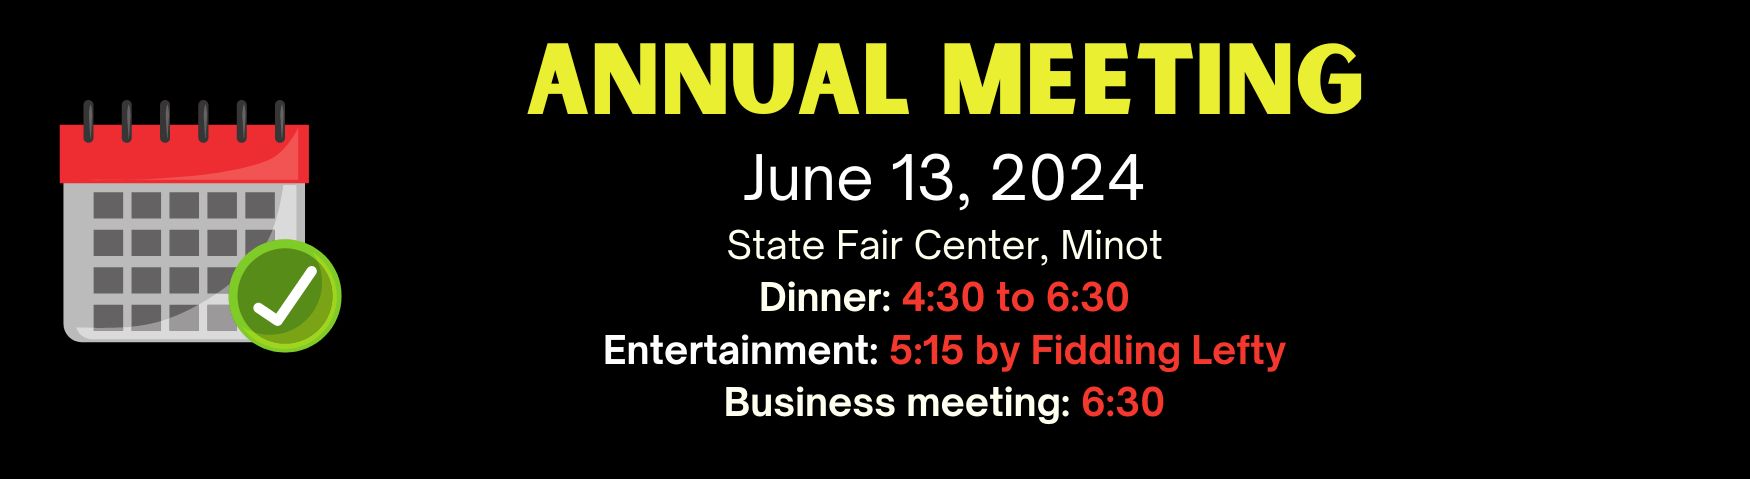 Annual Meeting information